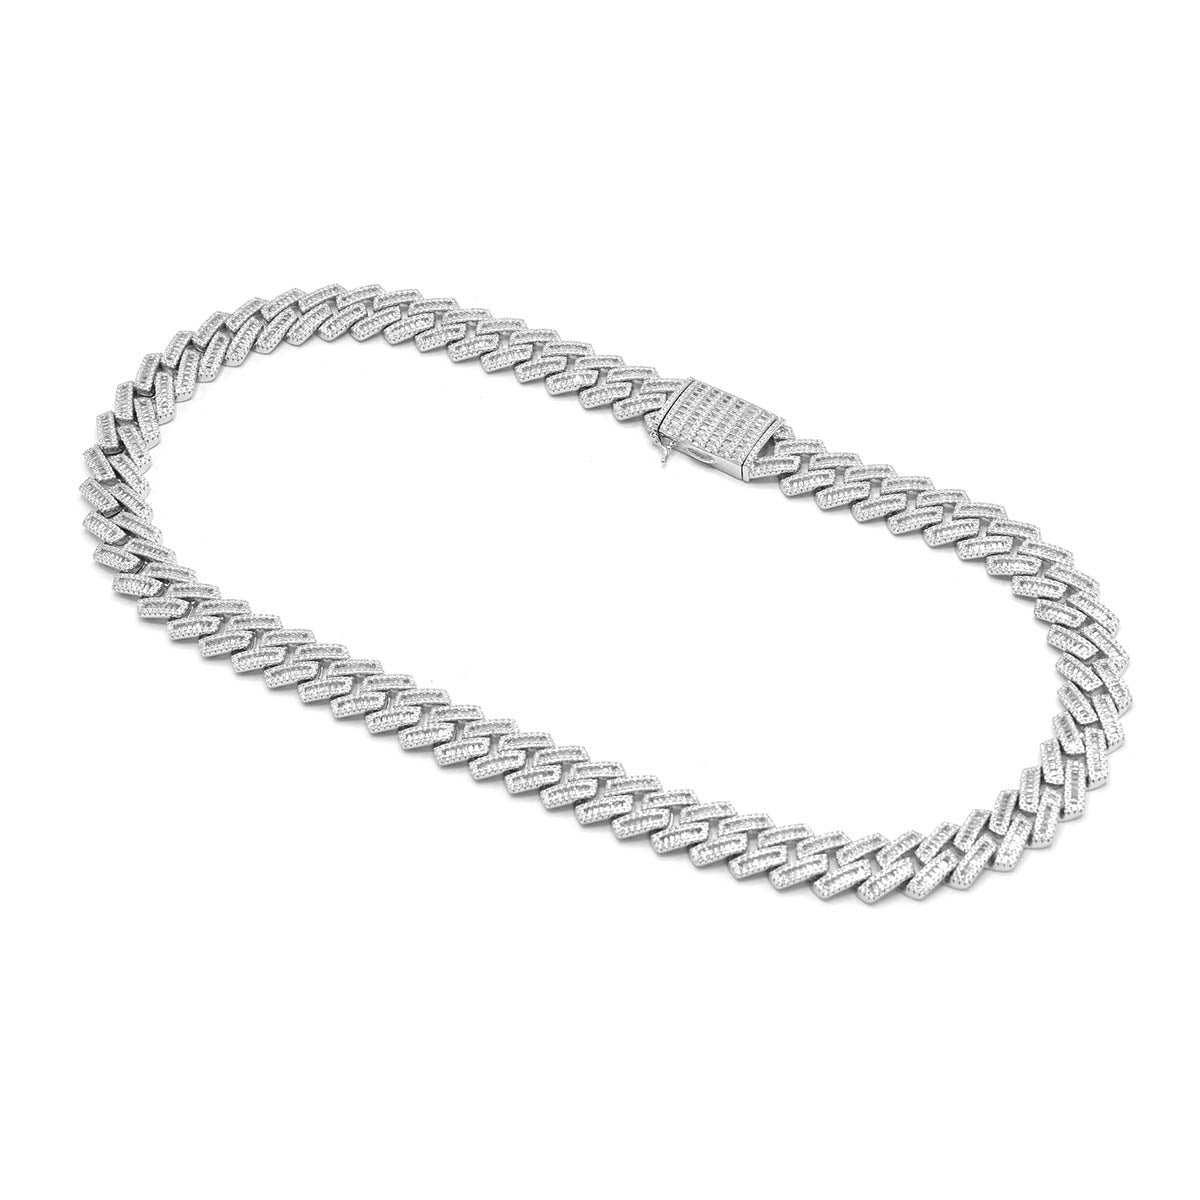 STNB-17 925 Silver 14MM Baguette Stone Miami Cuban Chain 18in 20in 24in Price by Weight